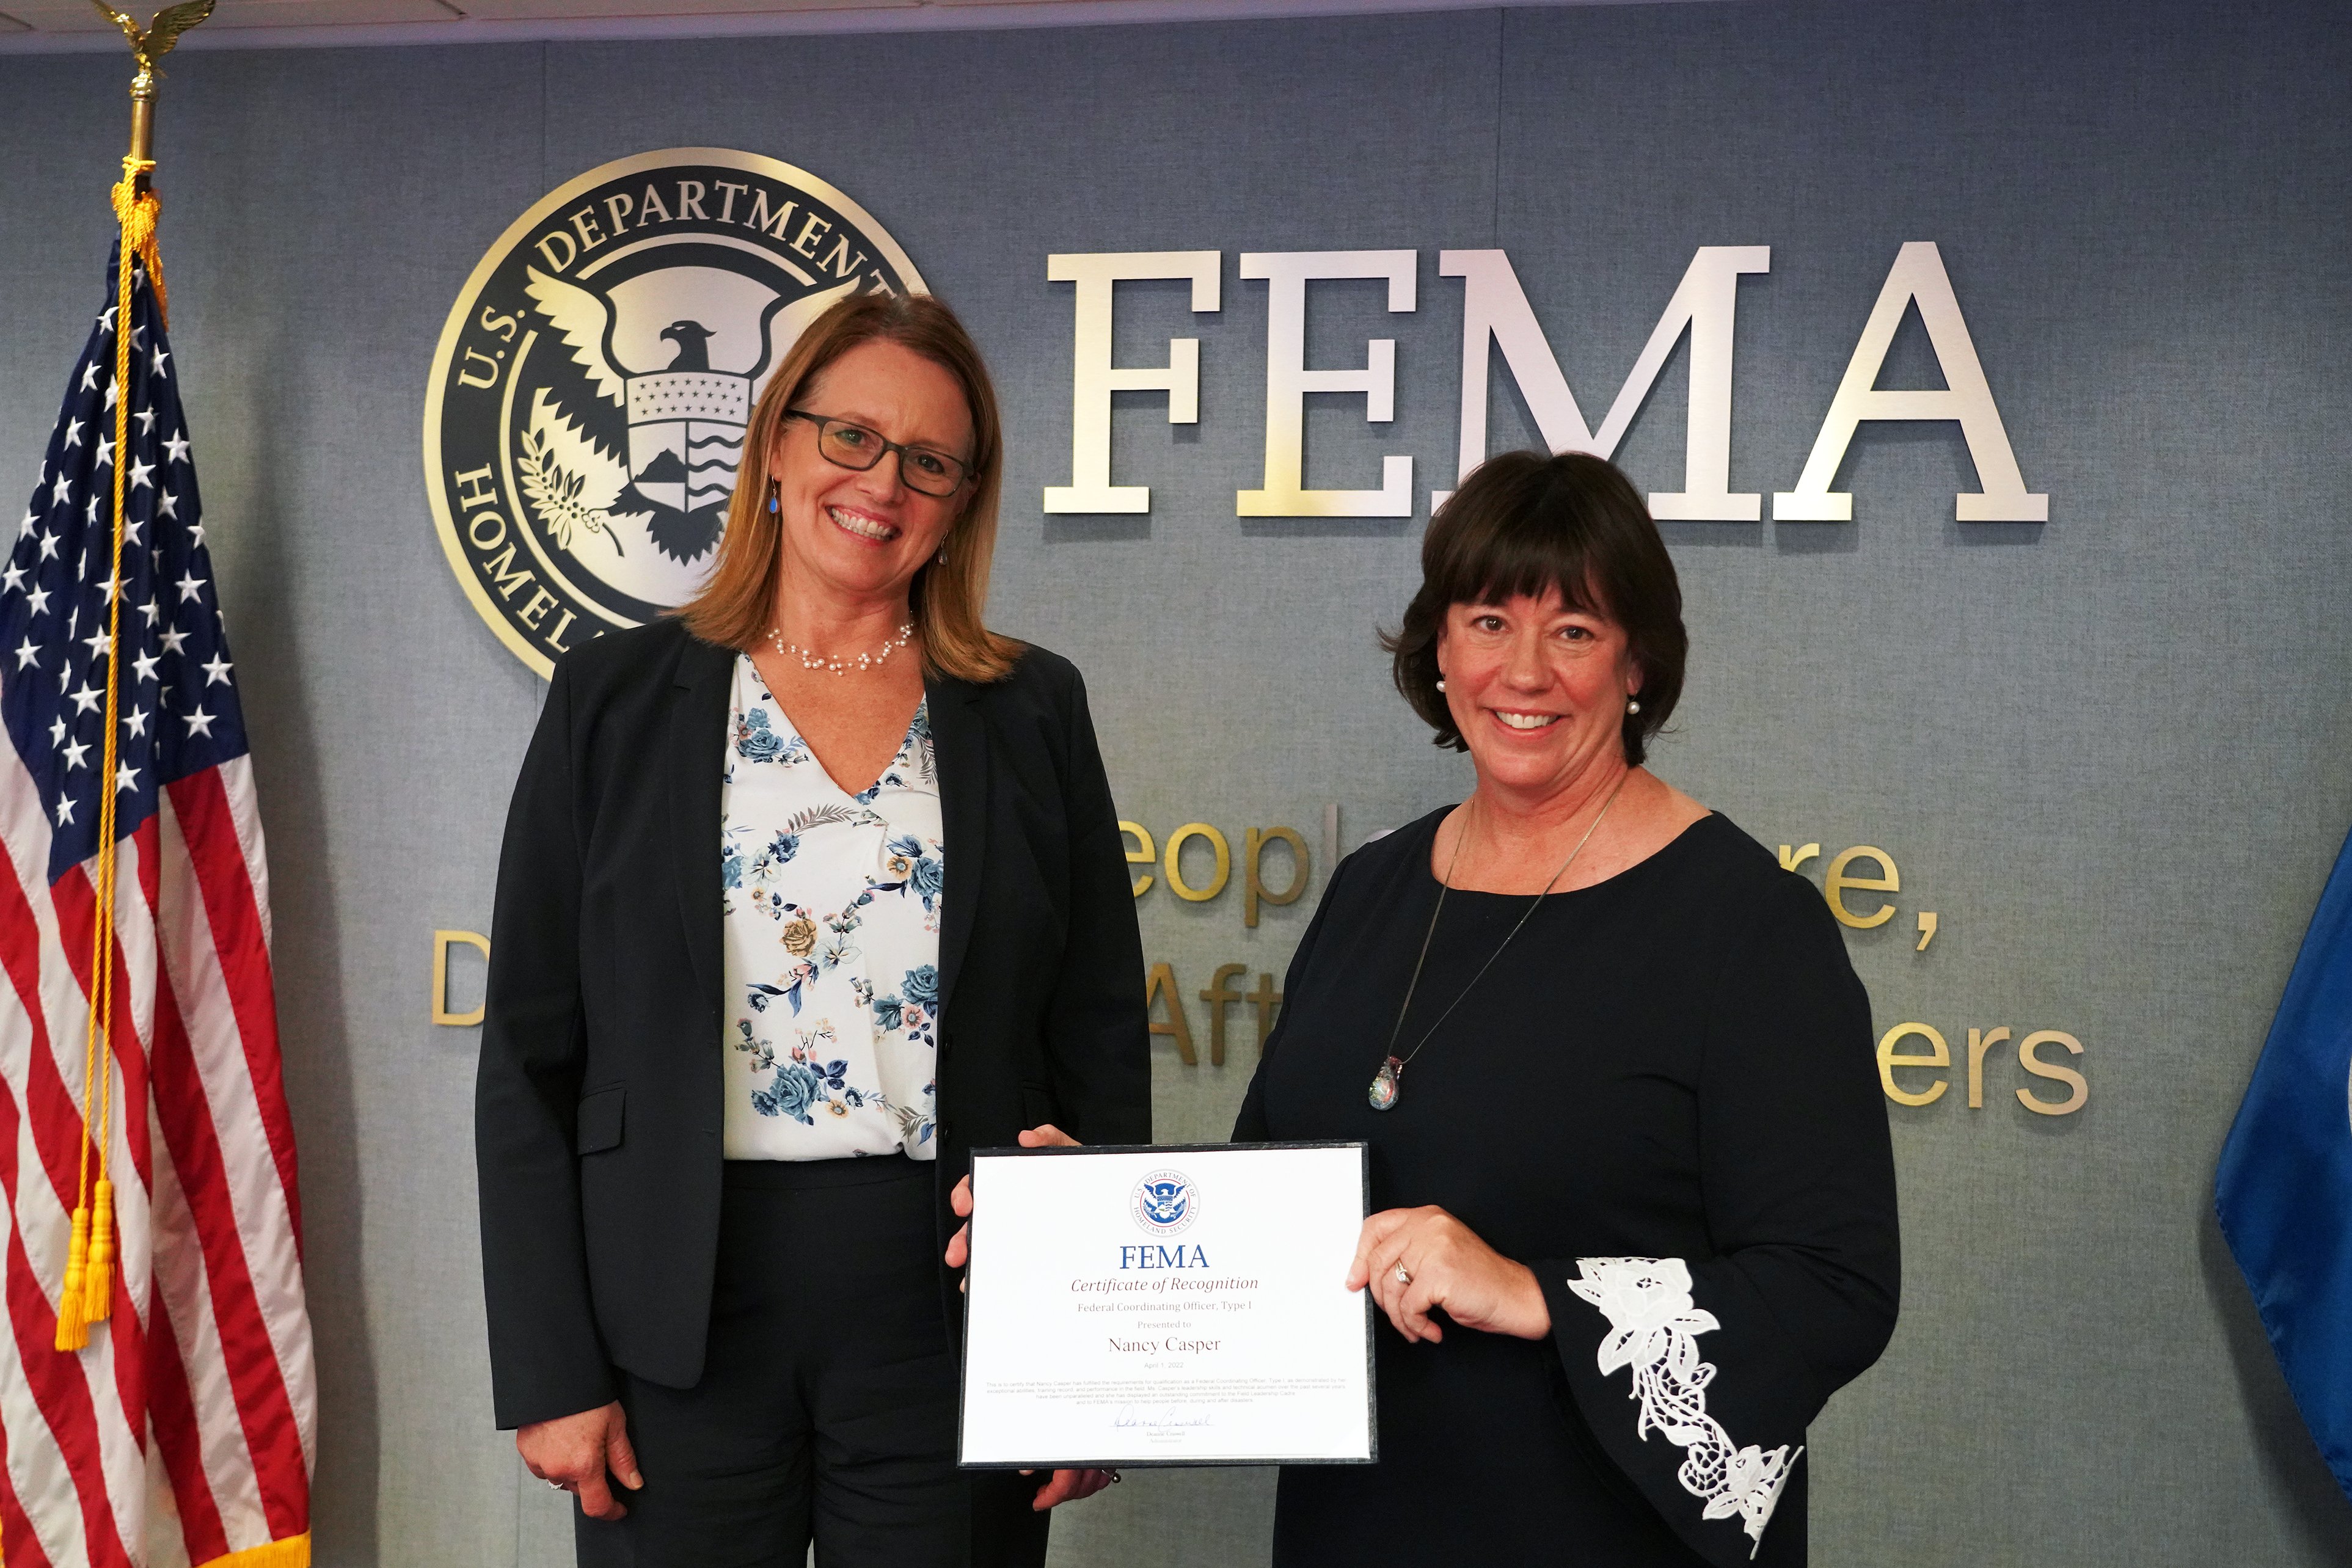 a photo of FEMA's Administrator Deanne Criswell standing by Federal Coordination Officer Nancy Casper who is holding a certificate in front of a wall with "FEMA" on the wall and an American flag to the left in the photo.